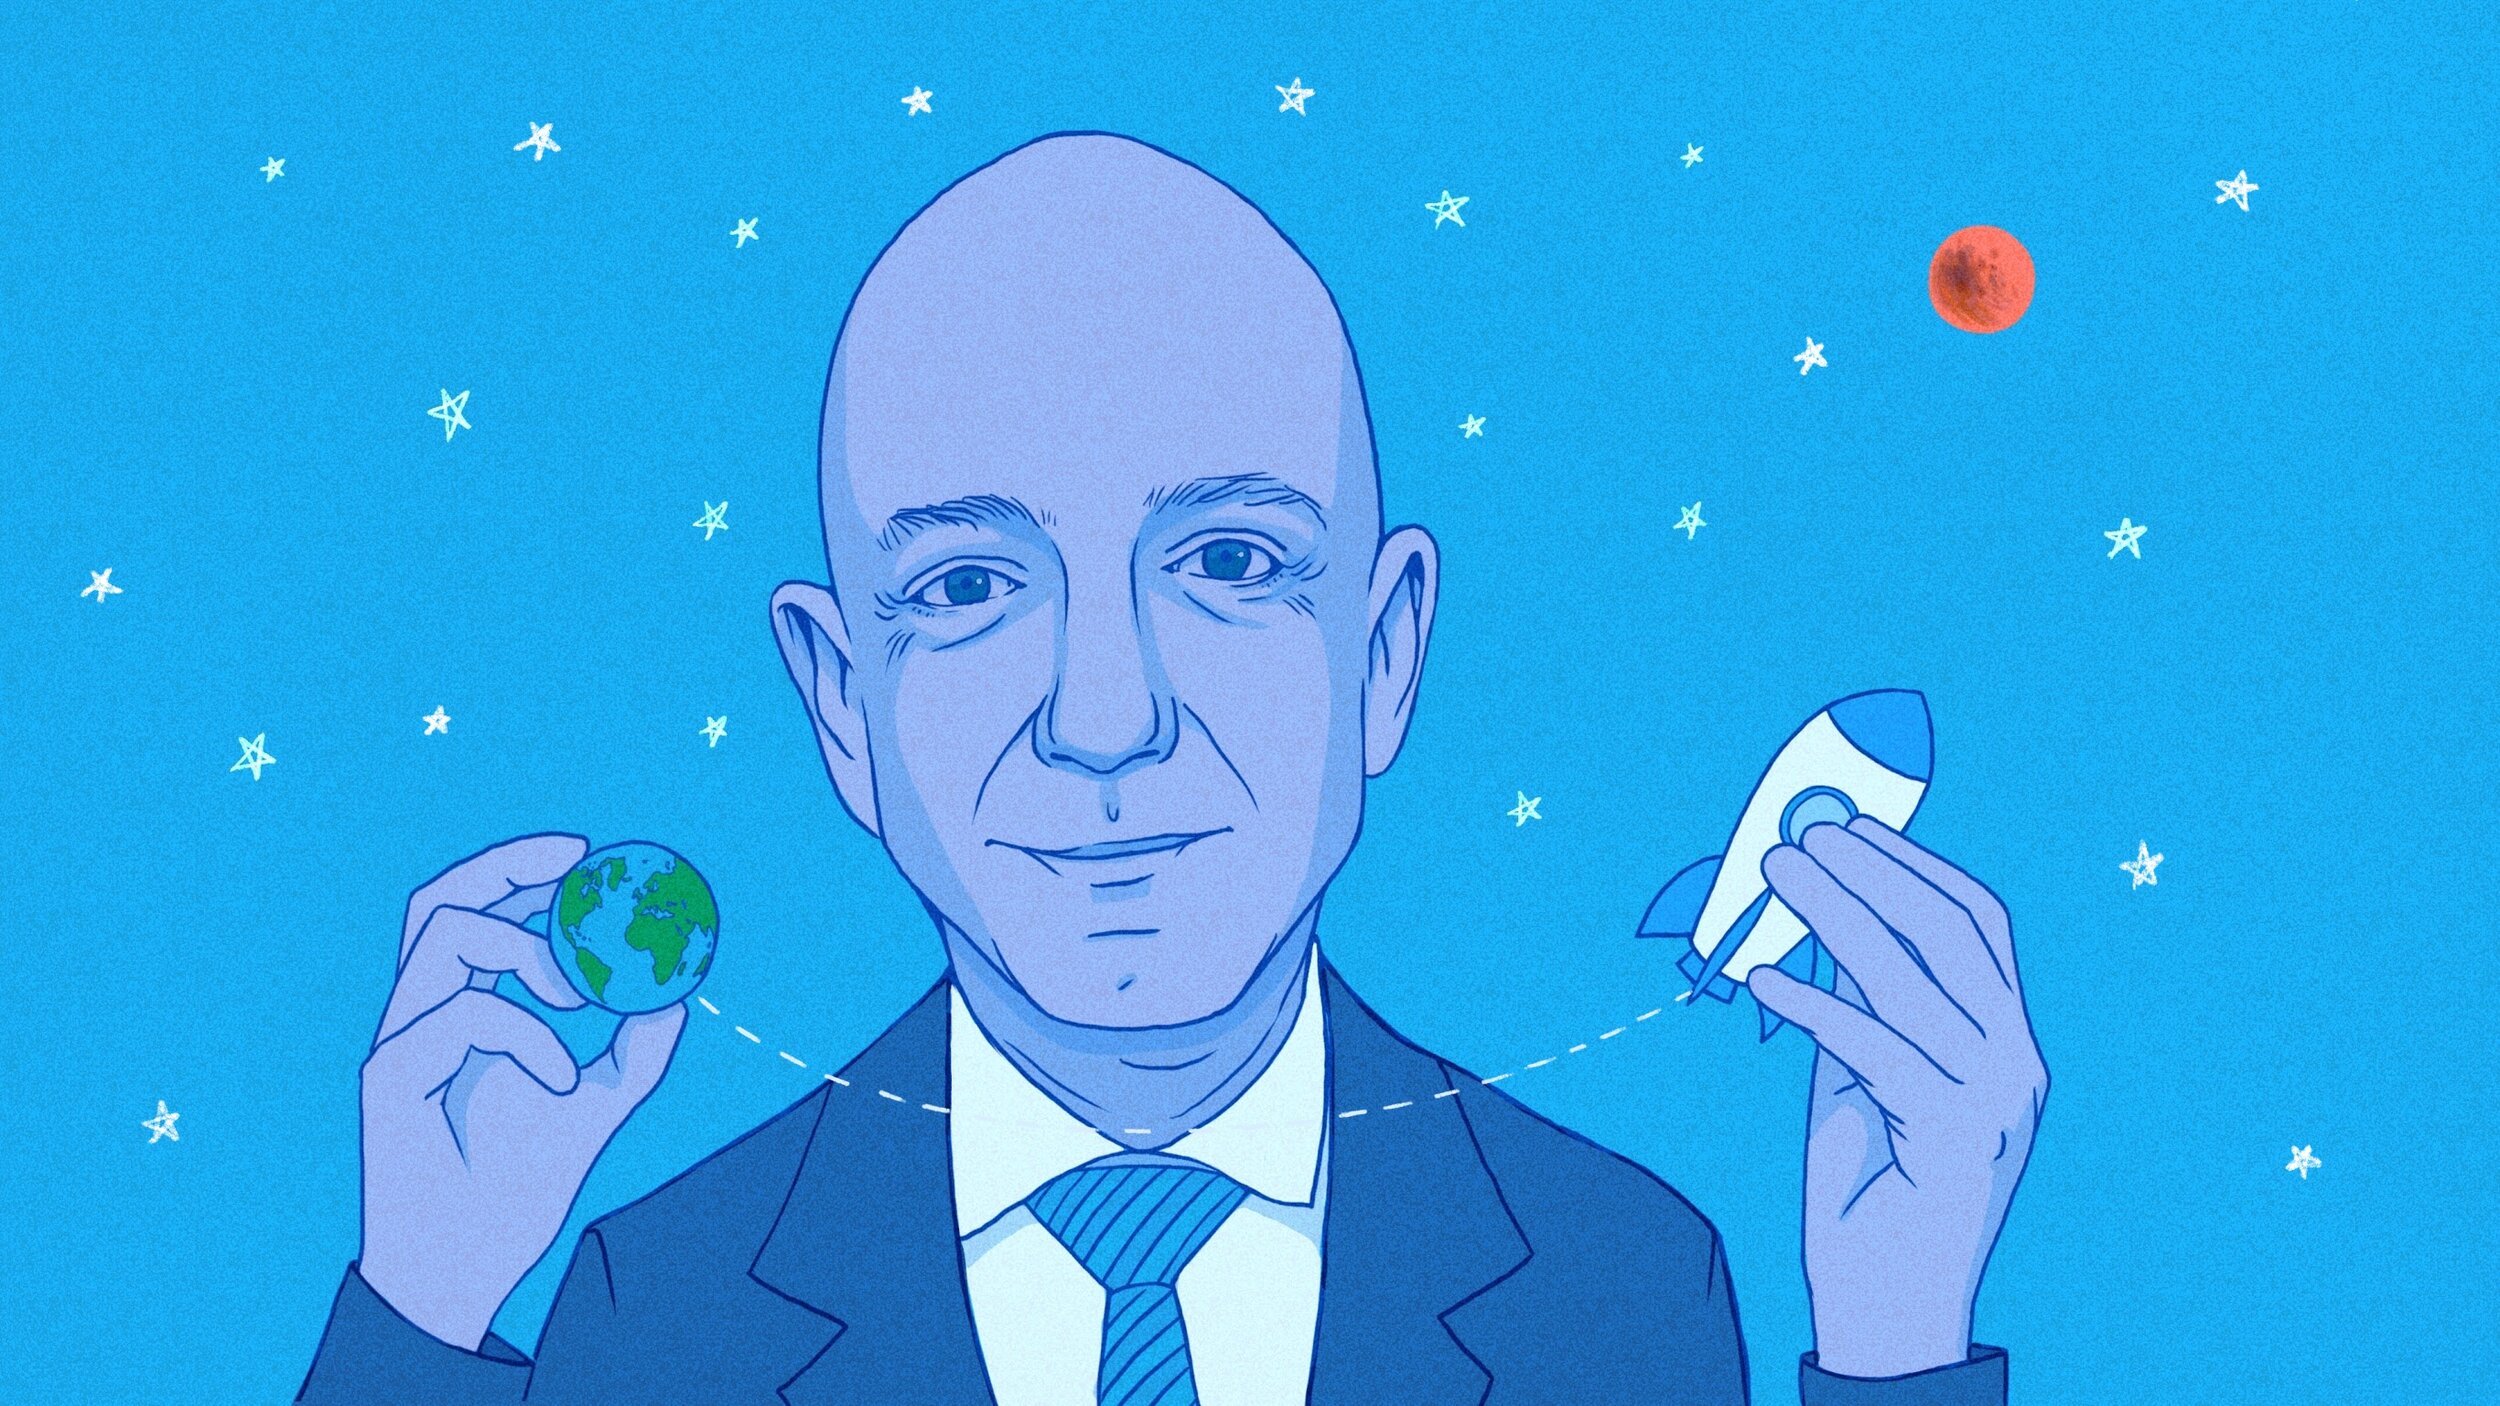 "Jeff Bezos can't save the Earth by leaving it" Crosscut opinion piece by Katie Wilson